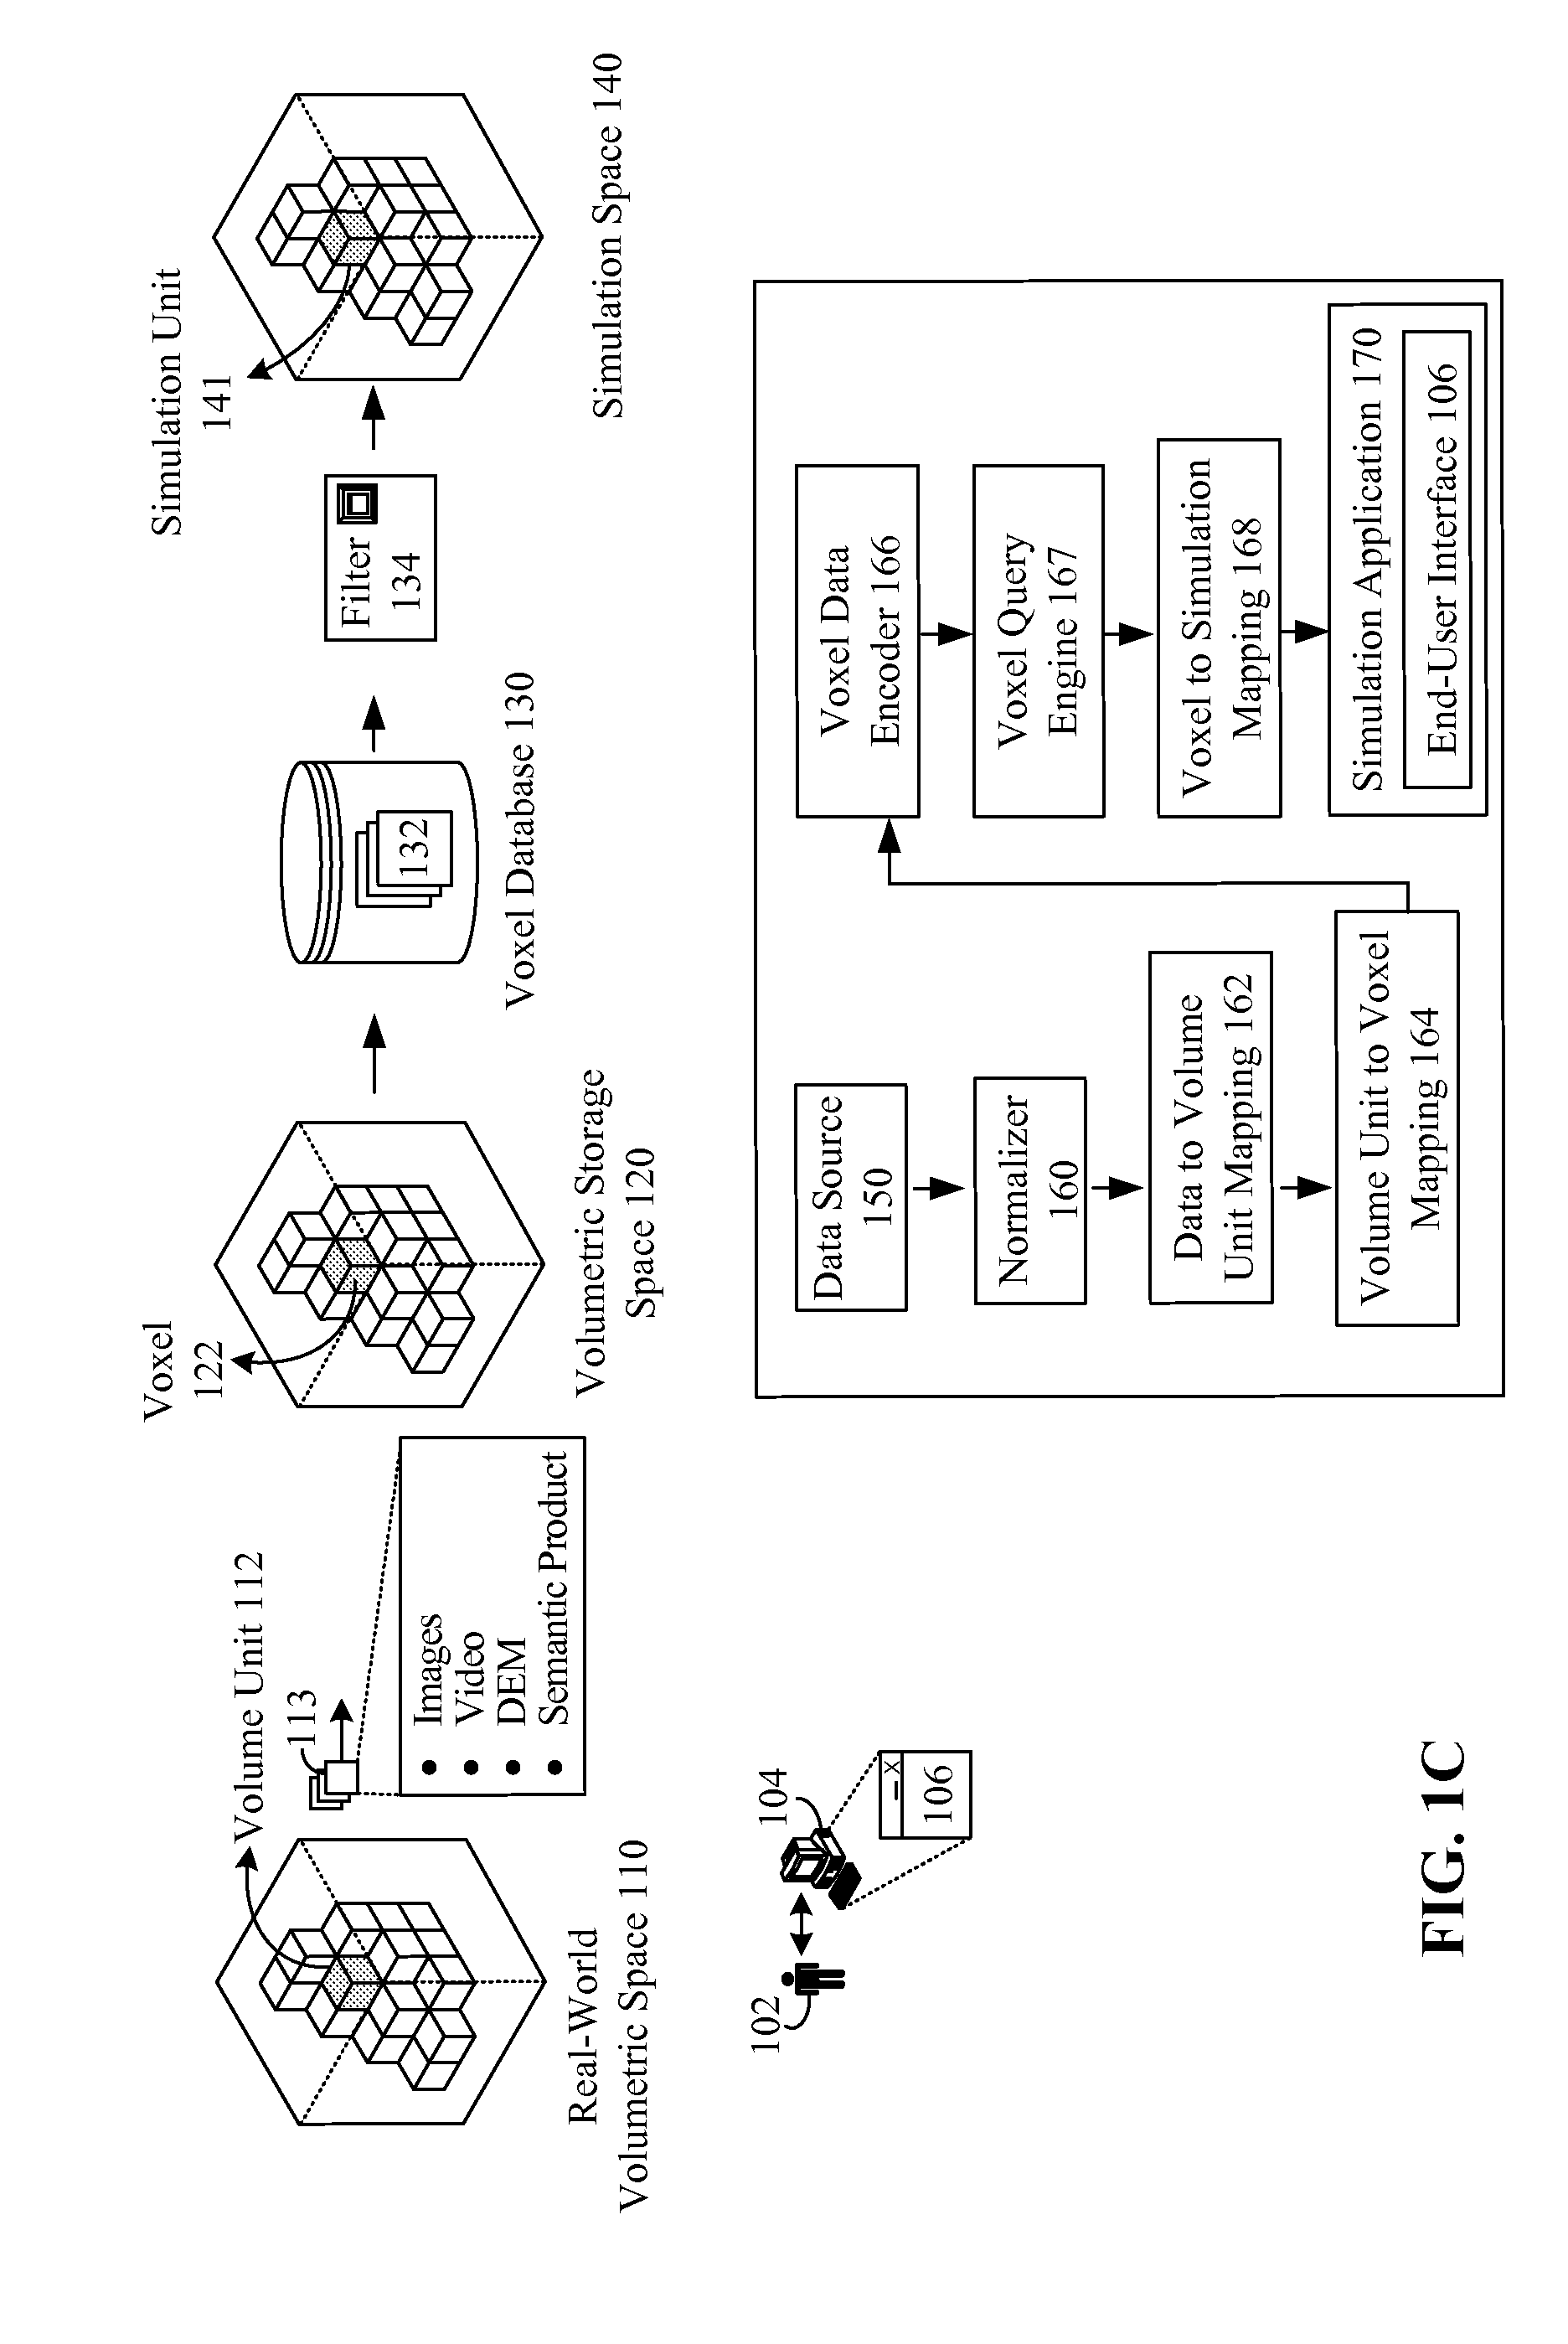 Supporting multiple different applications having different data needs using a voxel database